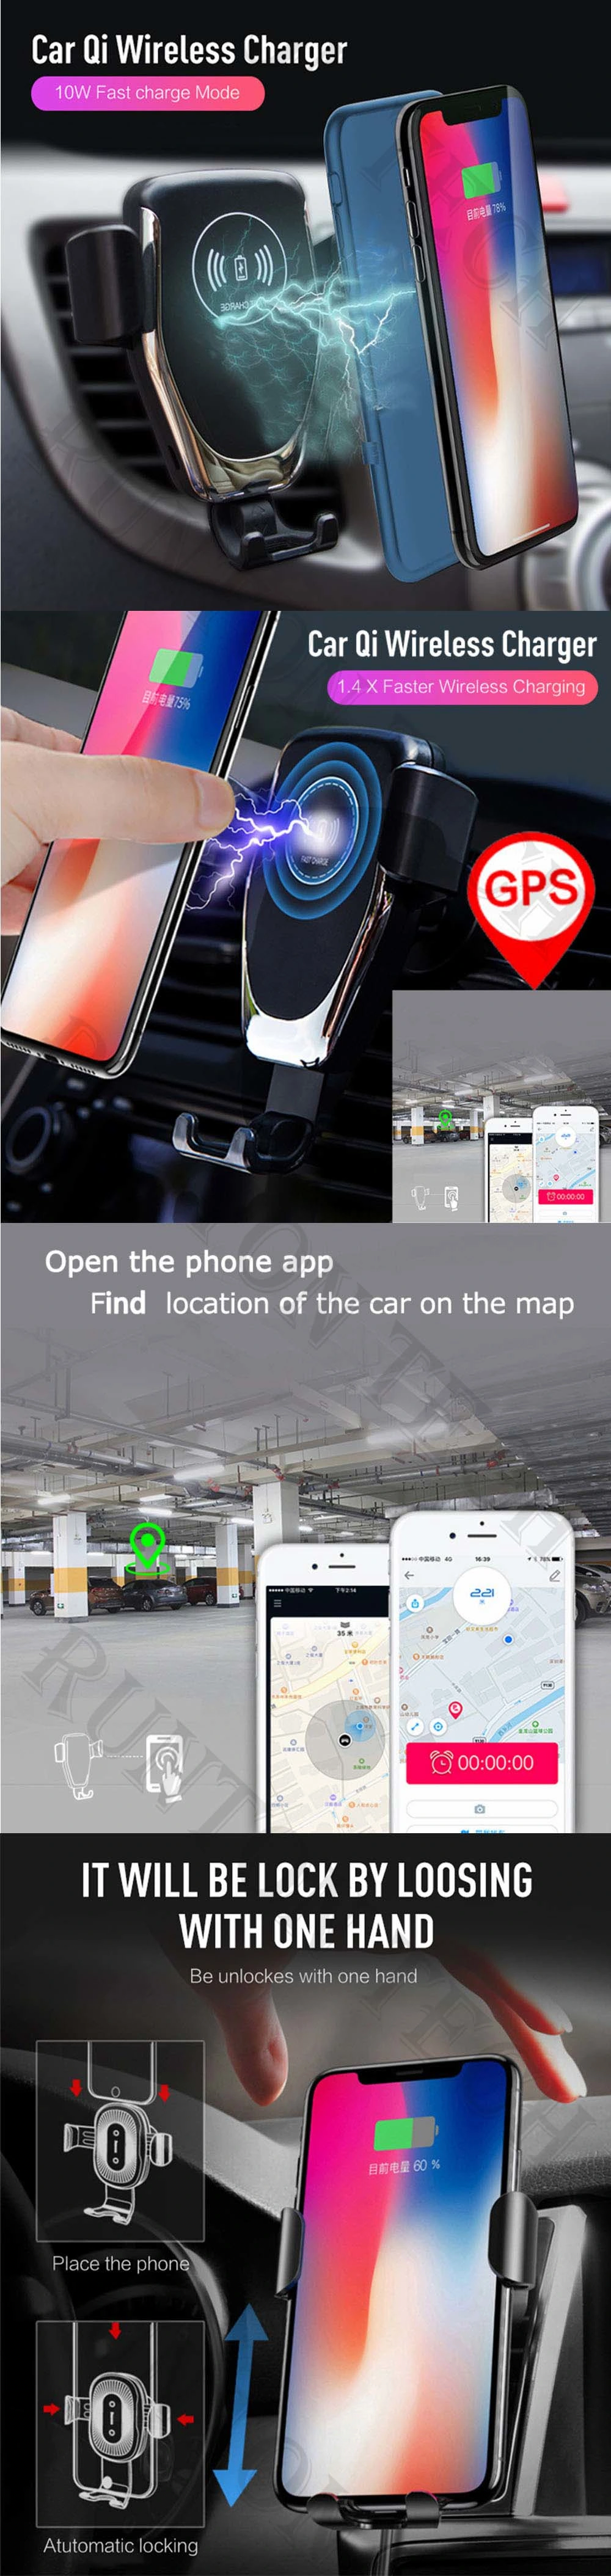 Car Holder Quick Charging Rt-C1 GPS Positioning One Key for Car Wireless Charger